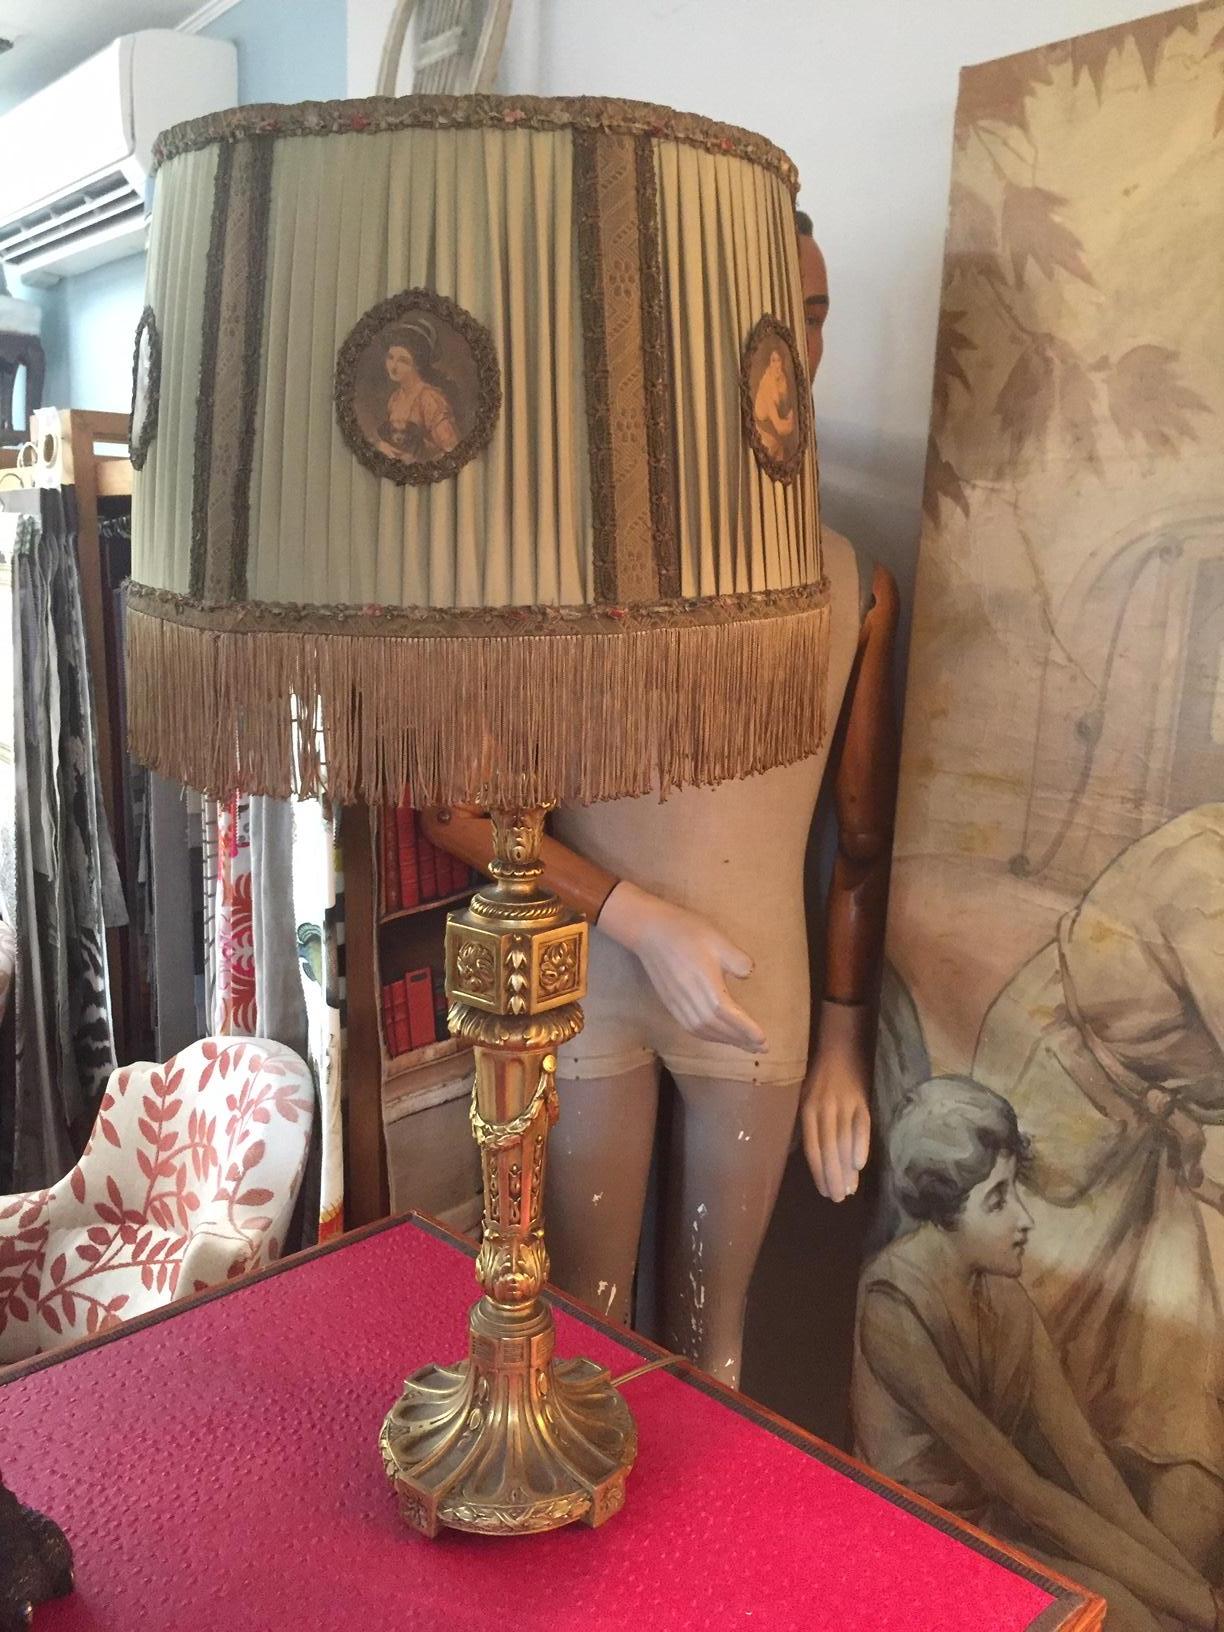 Beautiful French hand carved golden wood Louis XVI style table lamp from the 1900s with a beautiful green fringe lampshade. Female faces are hand embroidered on the lampshade.
Very elegant table lamp.